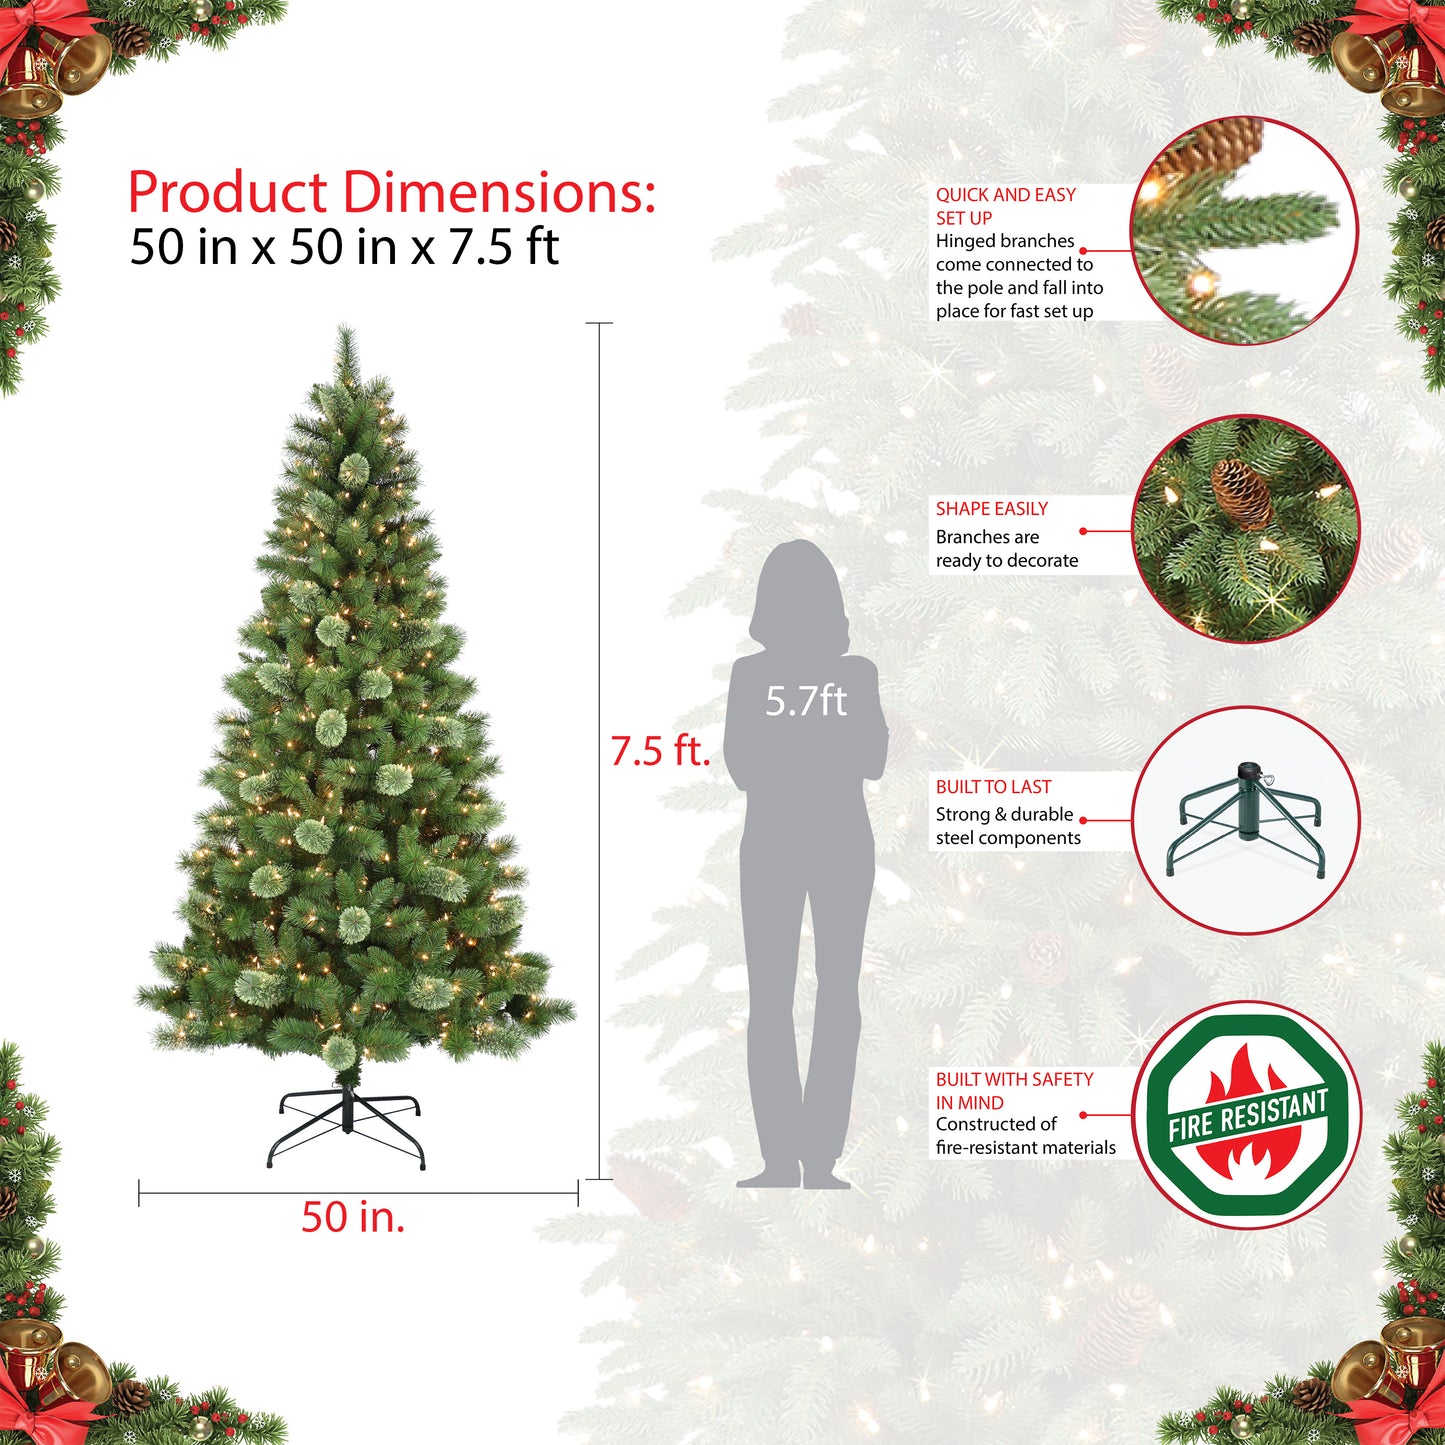 Pre-Lit 7.5' Western Pine Artificial Christmas Tree with 600 Lights, Green